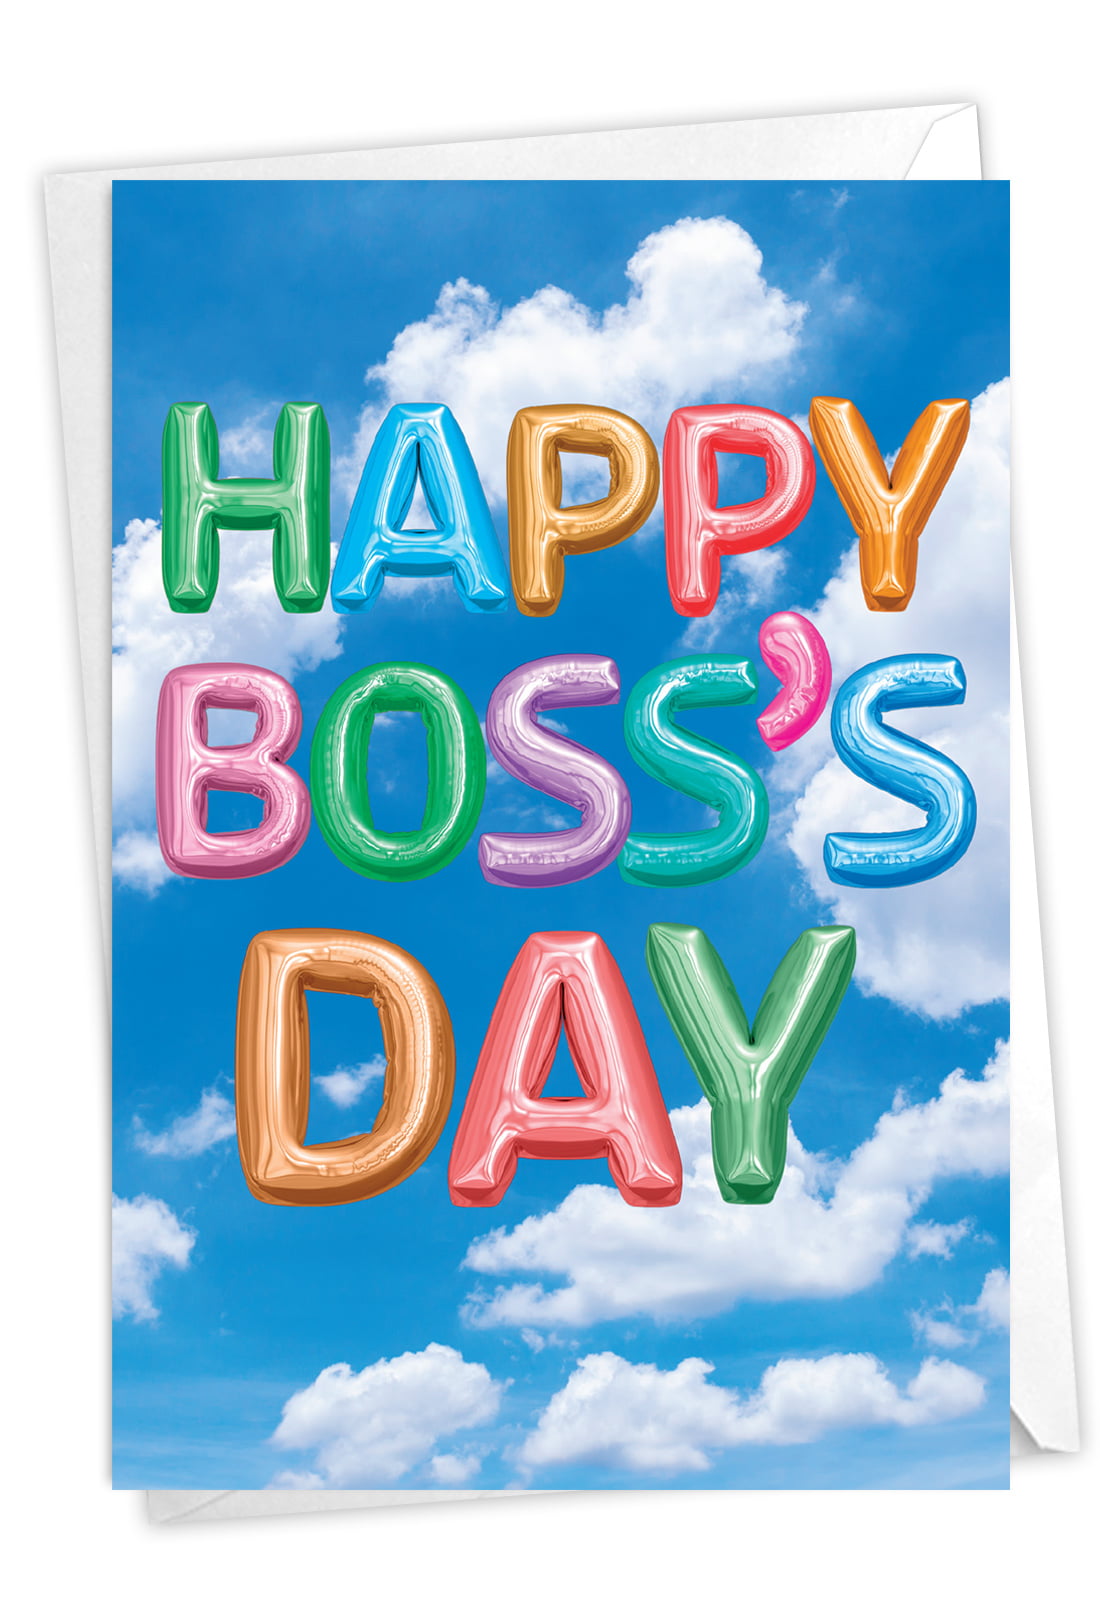 happy-boss-s-day-greeting-card-notecard-for-boss-manager-mentor-c5651zbog-walmart